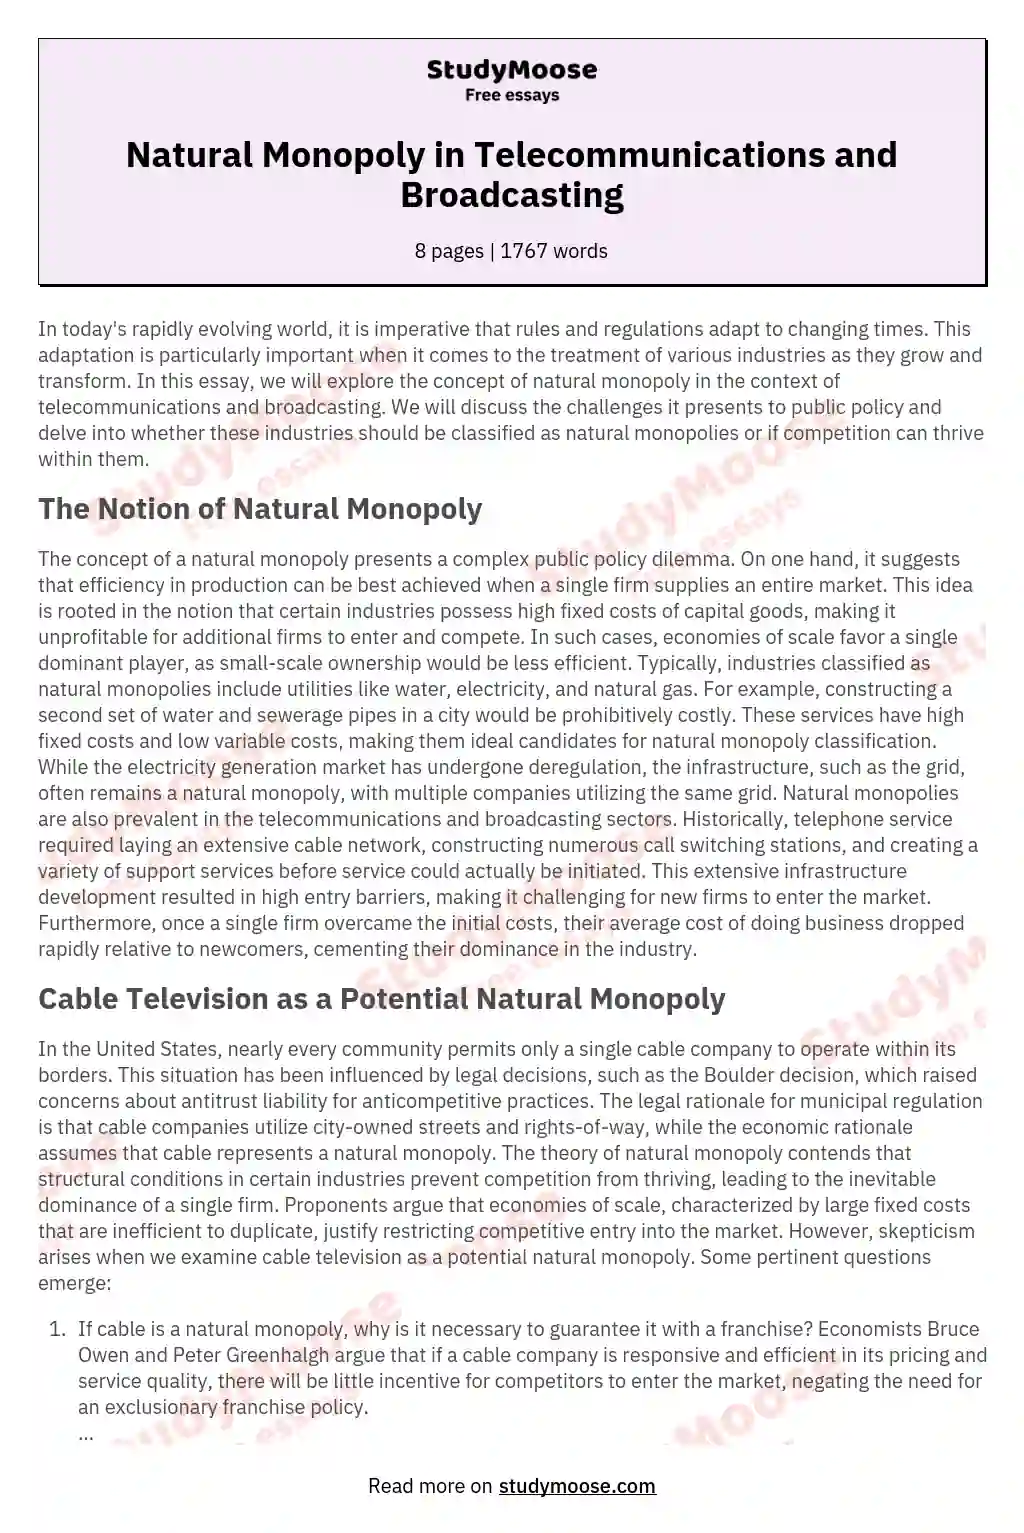 Natural Monopoly in Telecommunications and Broadcasting essay